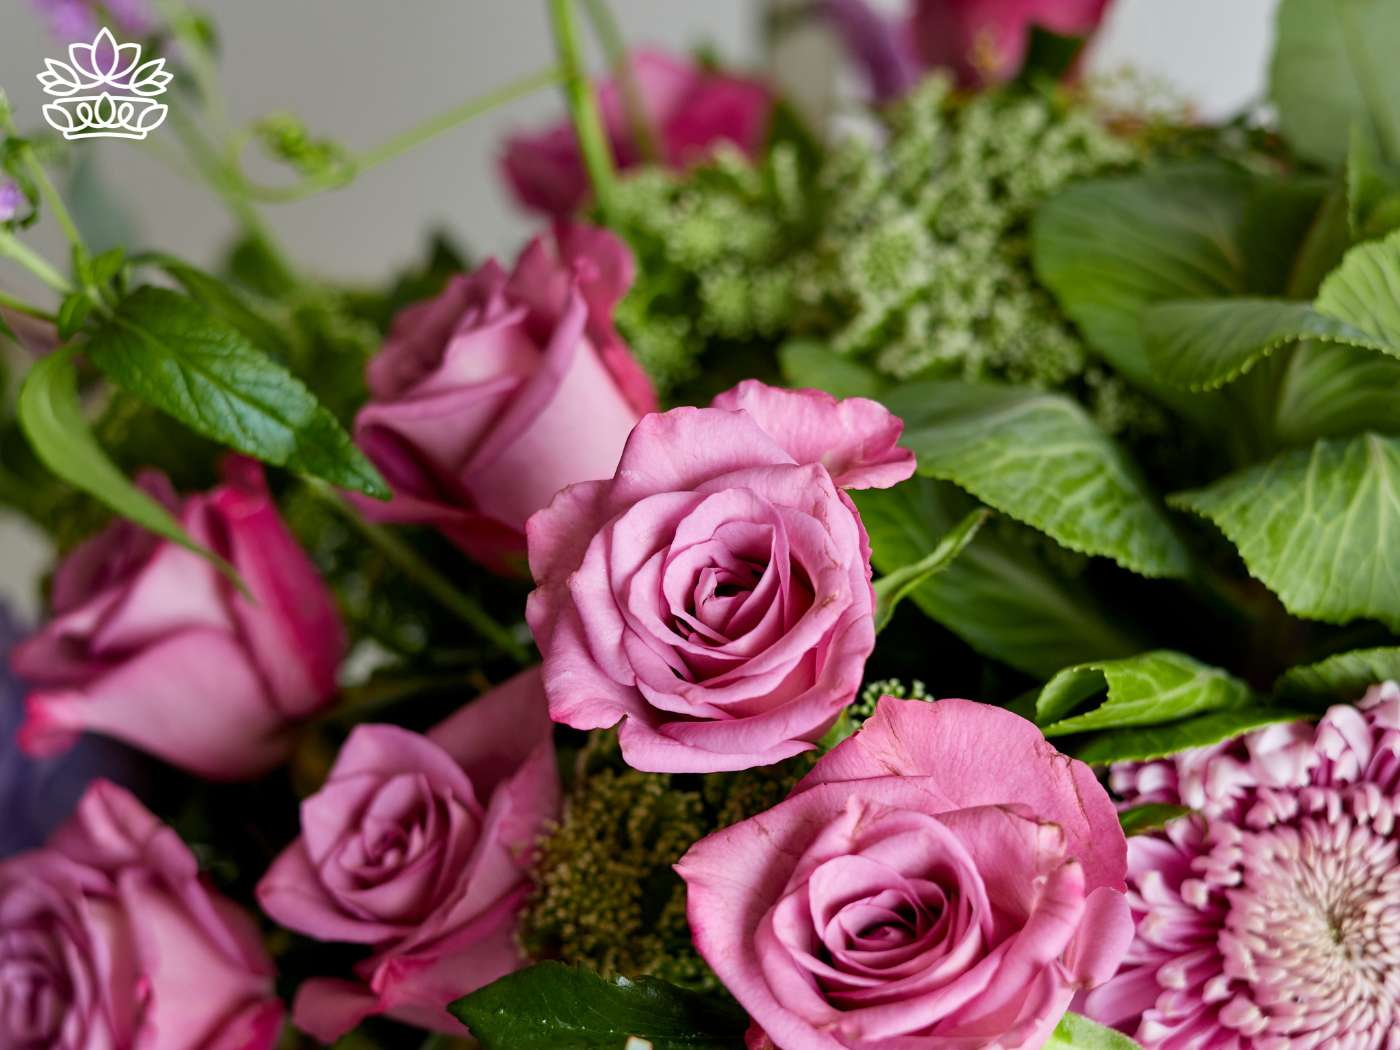 Close-up of exquisite pink roses with lush green foliage, part of the elegant Congratulations Flower and Gift Collection—Fabulous Flowers and Gifts.